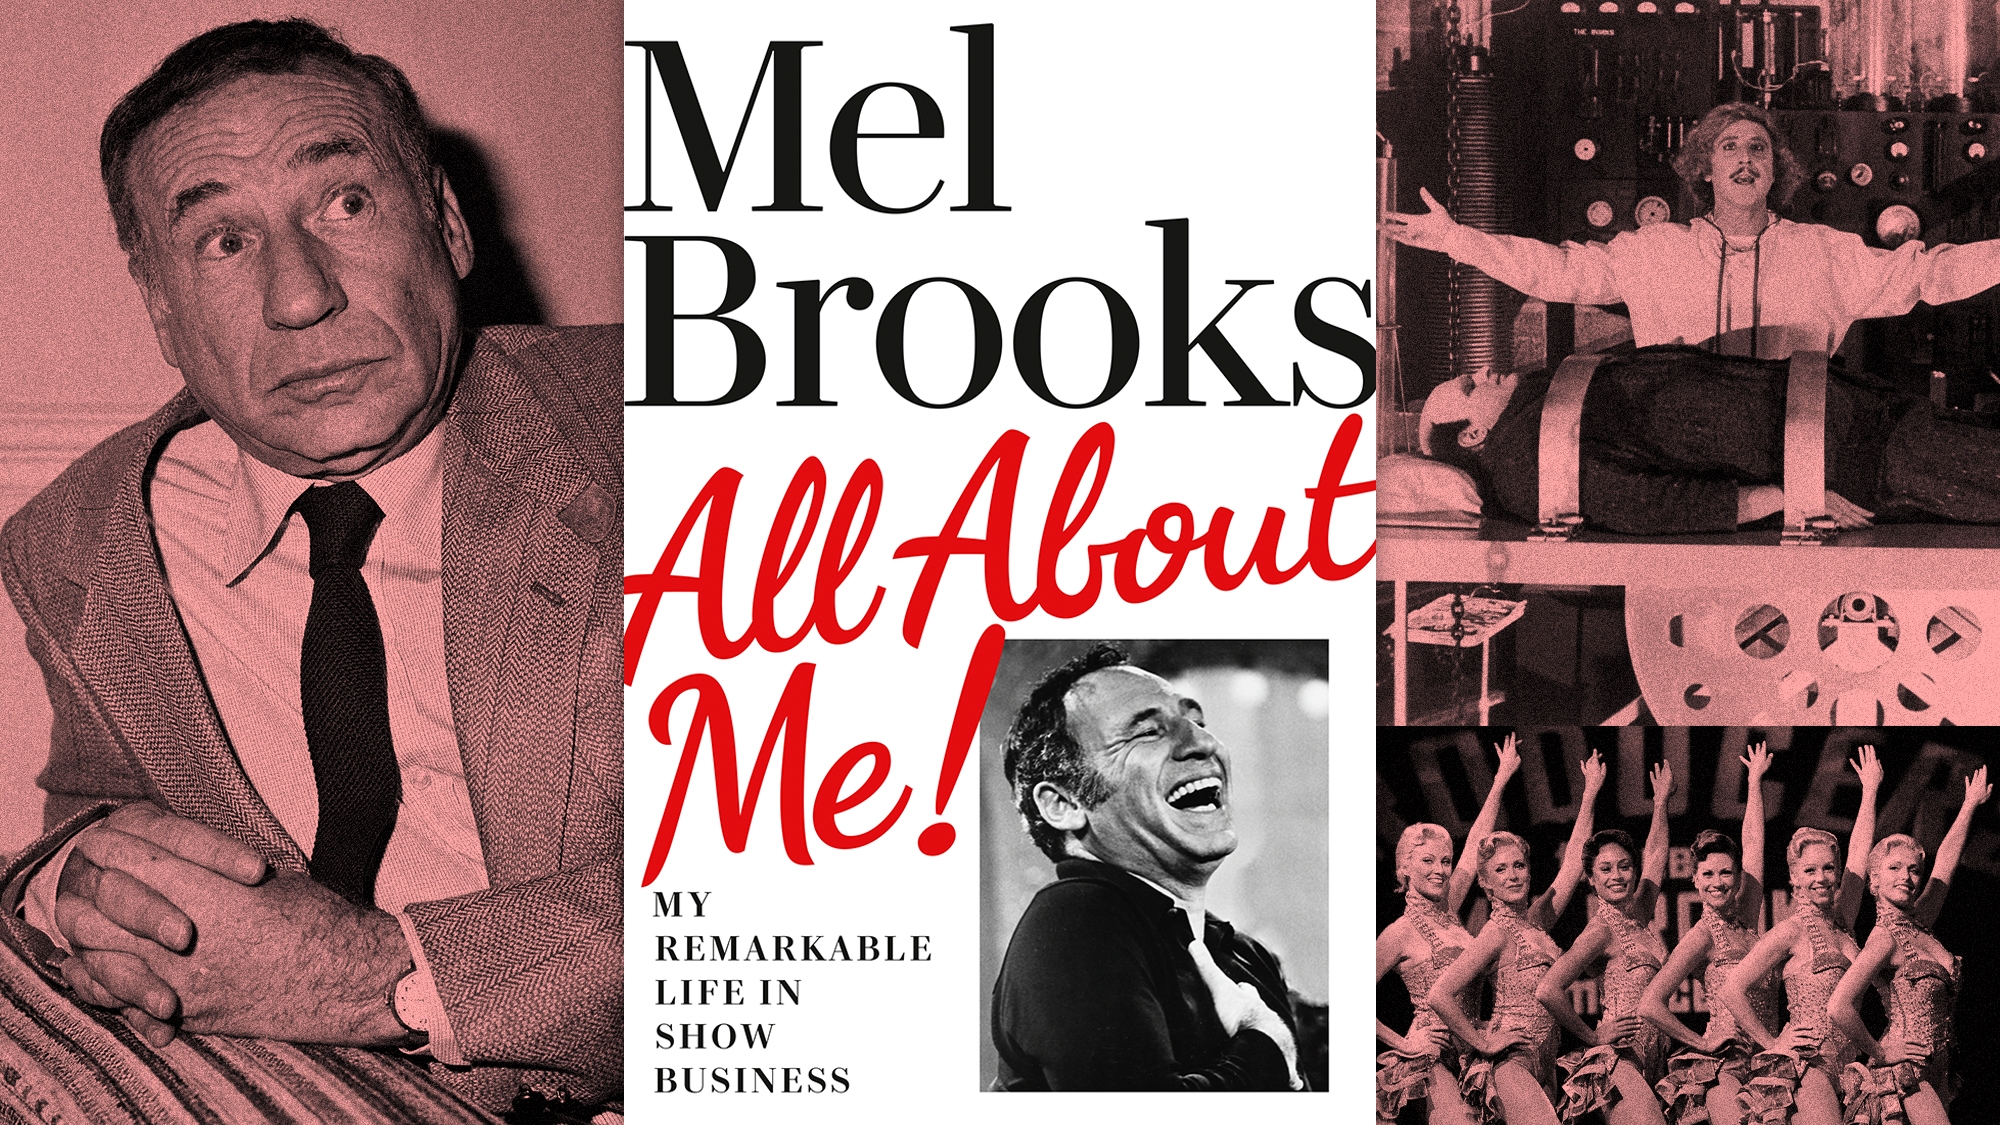 All the best stories, trivia, and tidbits from Mel Brooks’ memoir, All About Me!